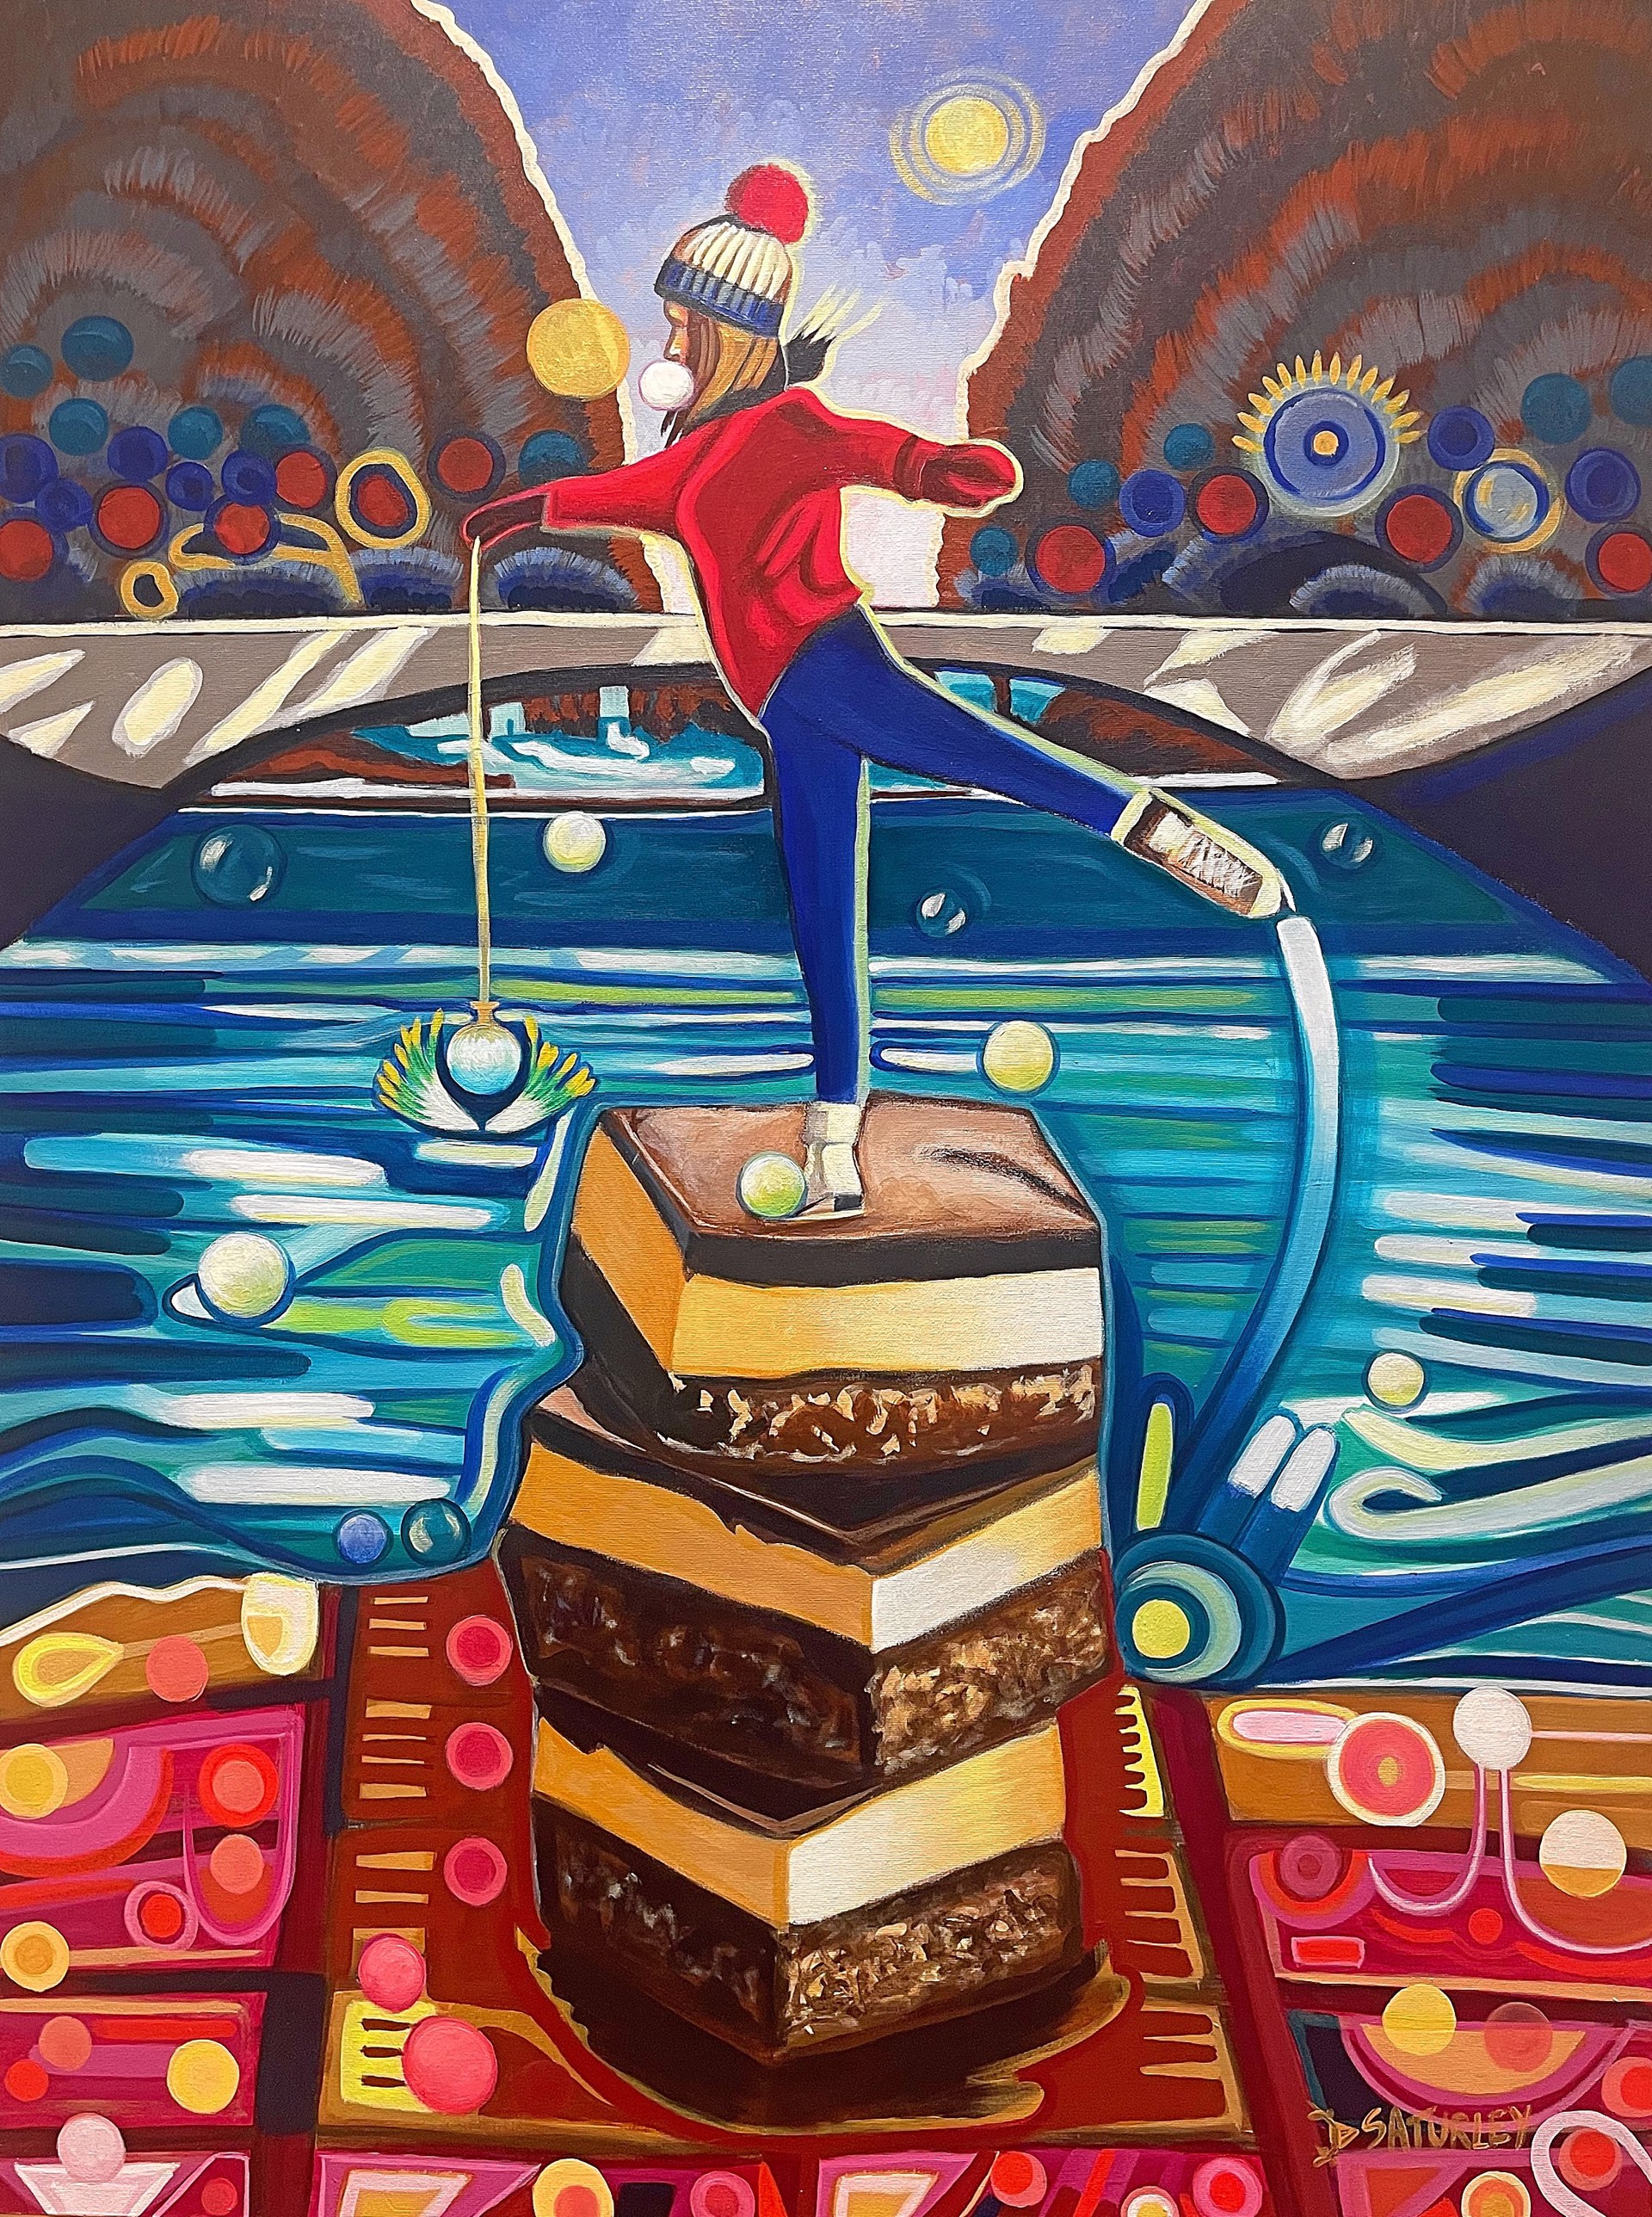 On Top of Nanaimo Bars by BRANDY SATURLEY